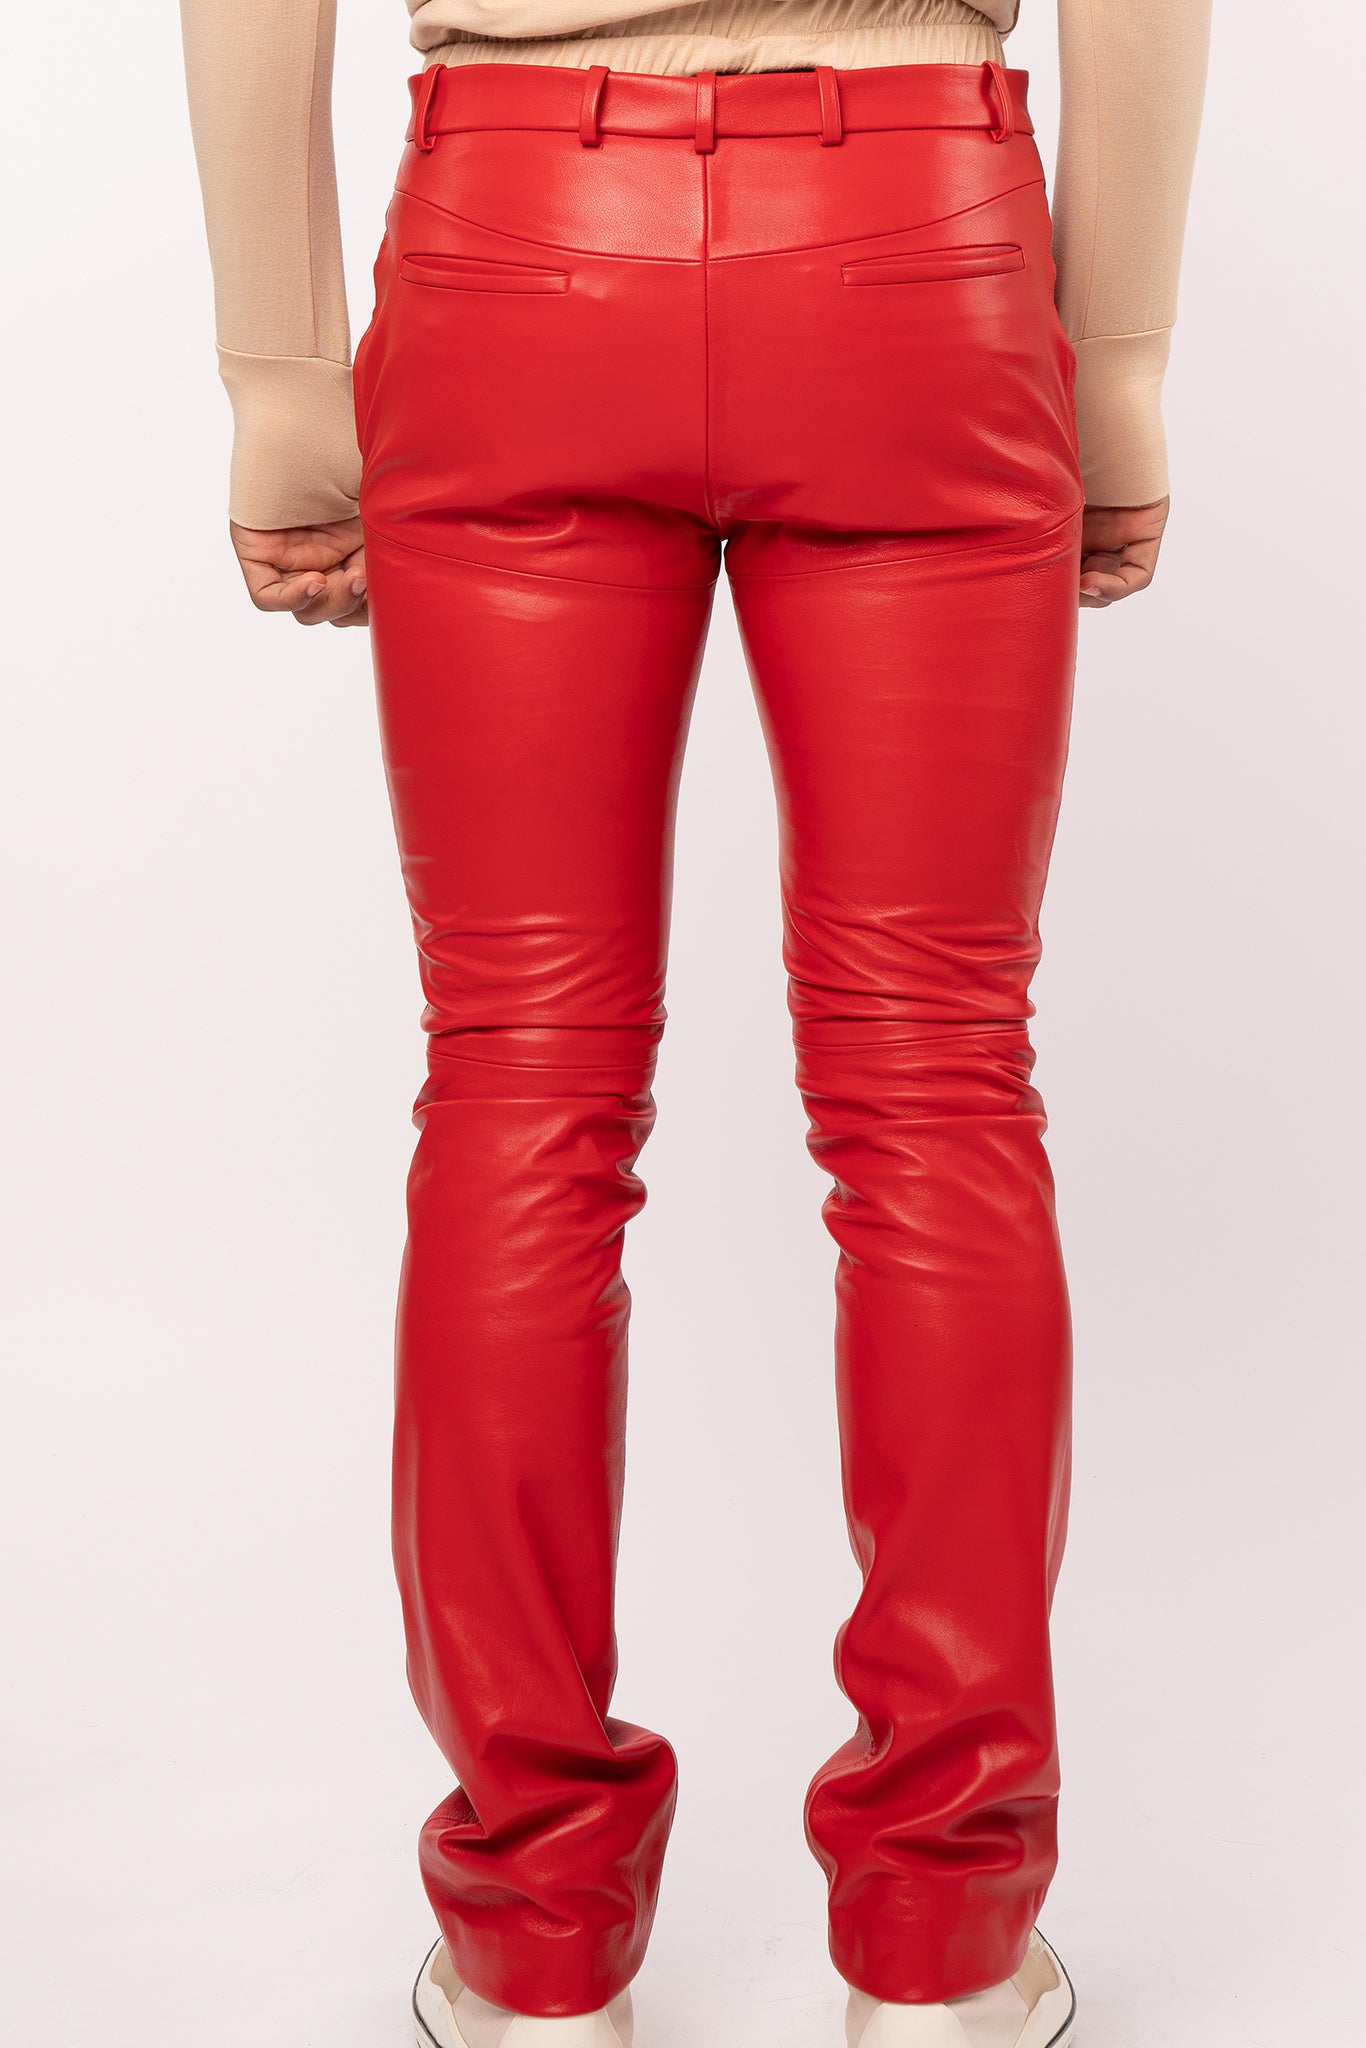 Men Fitted Leather Pants